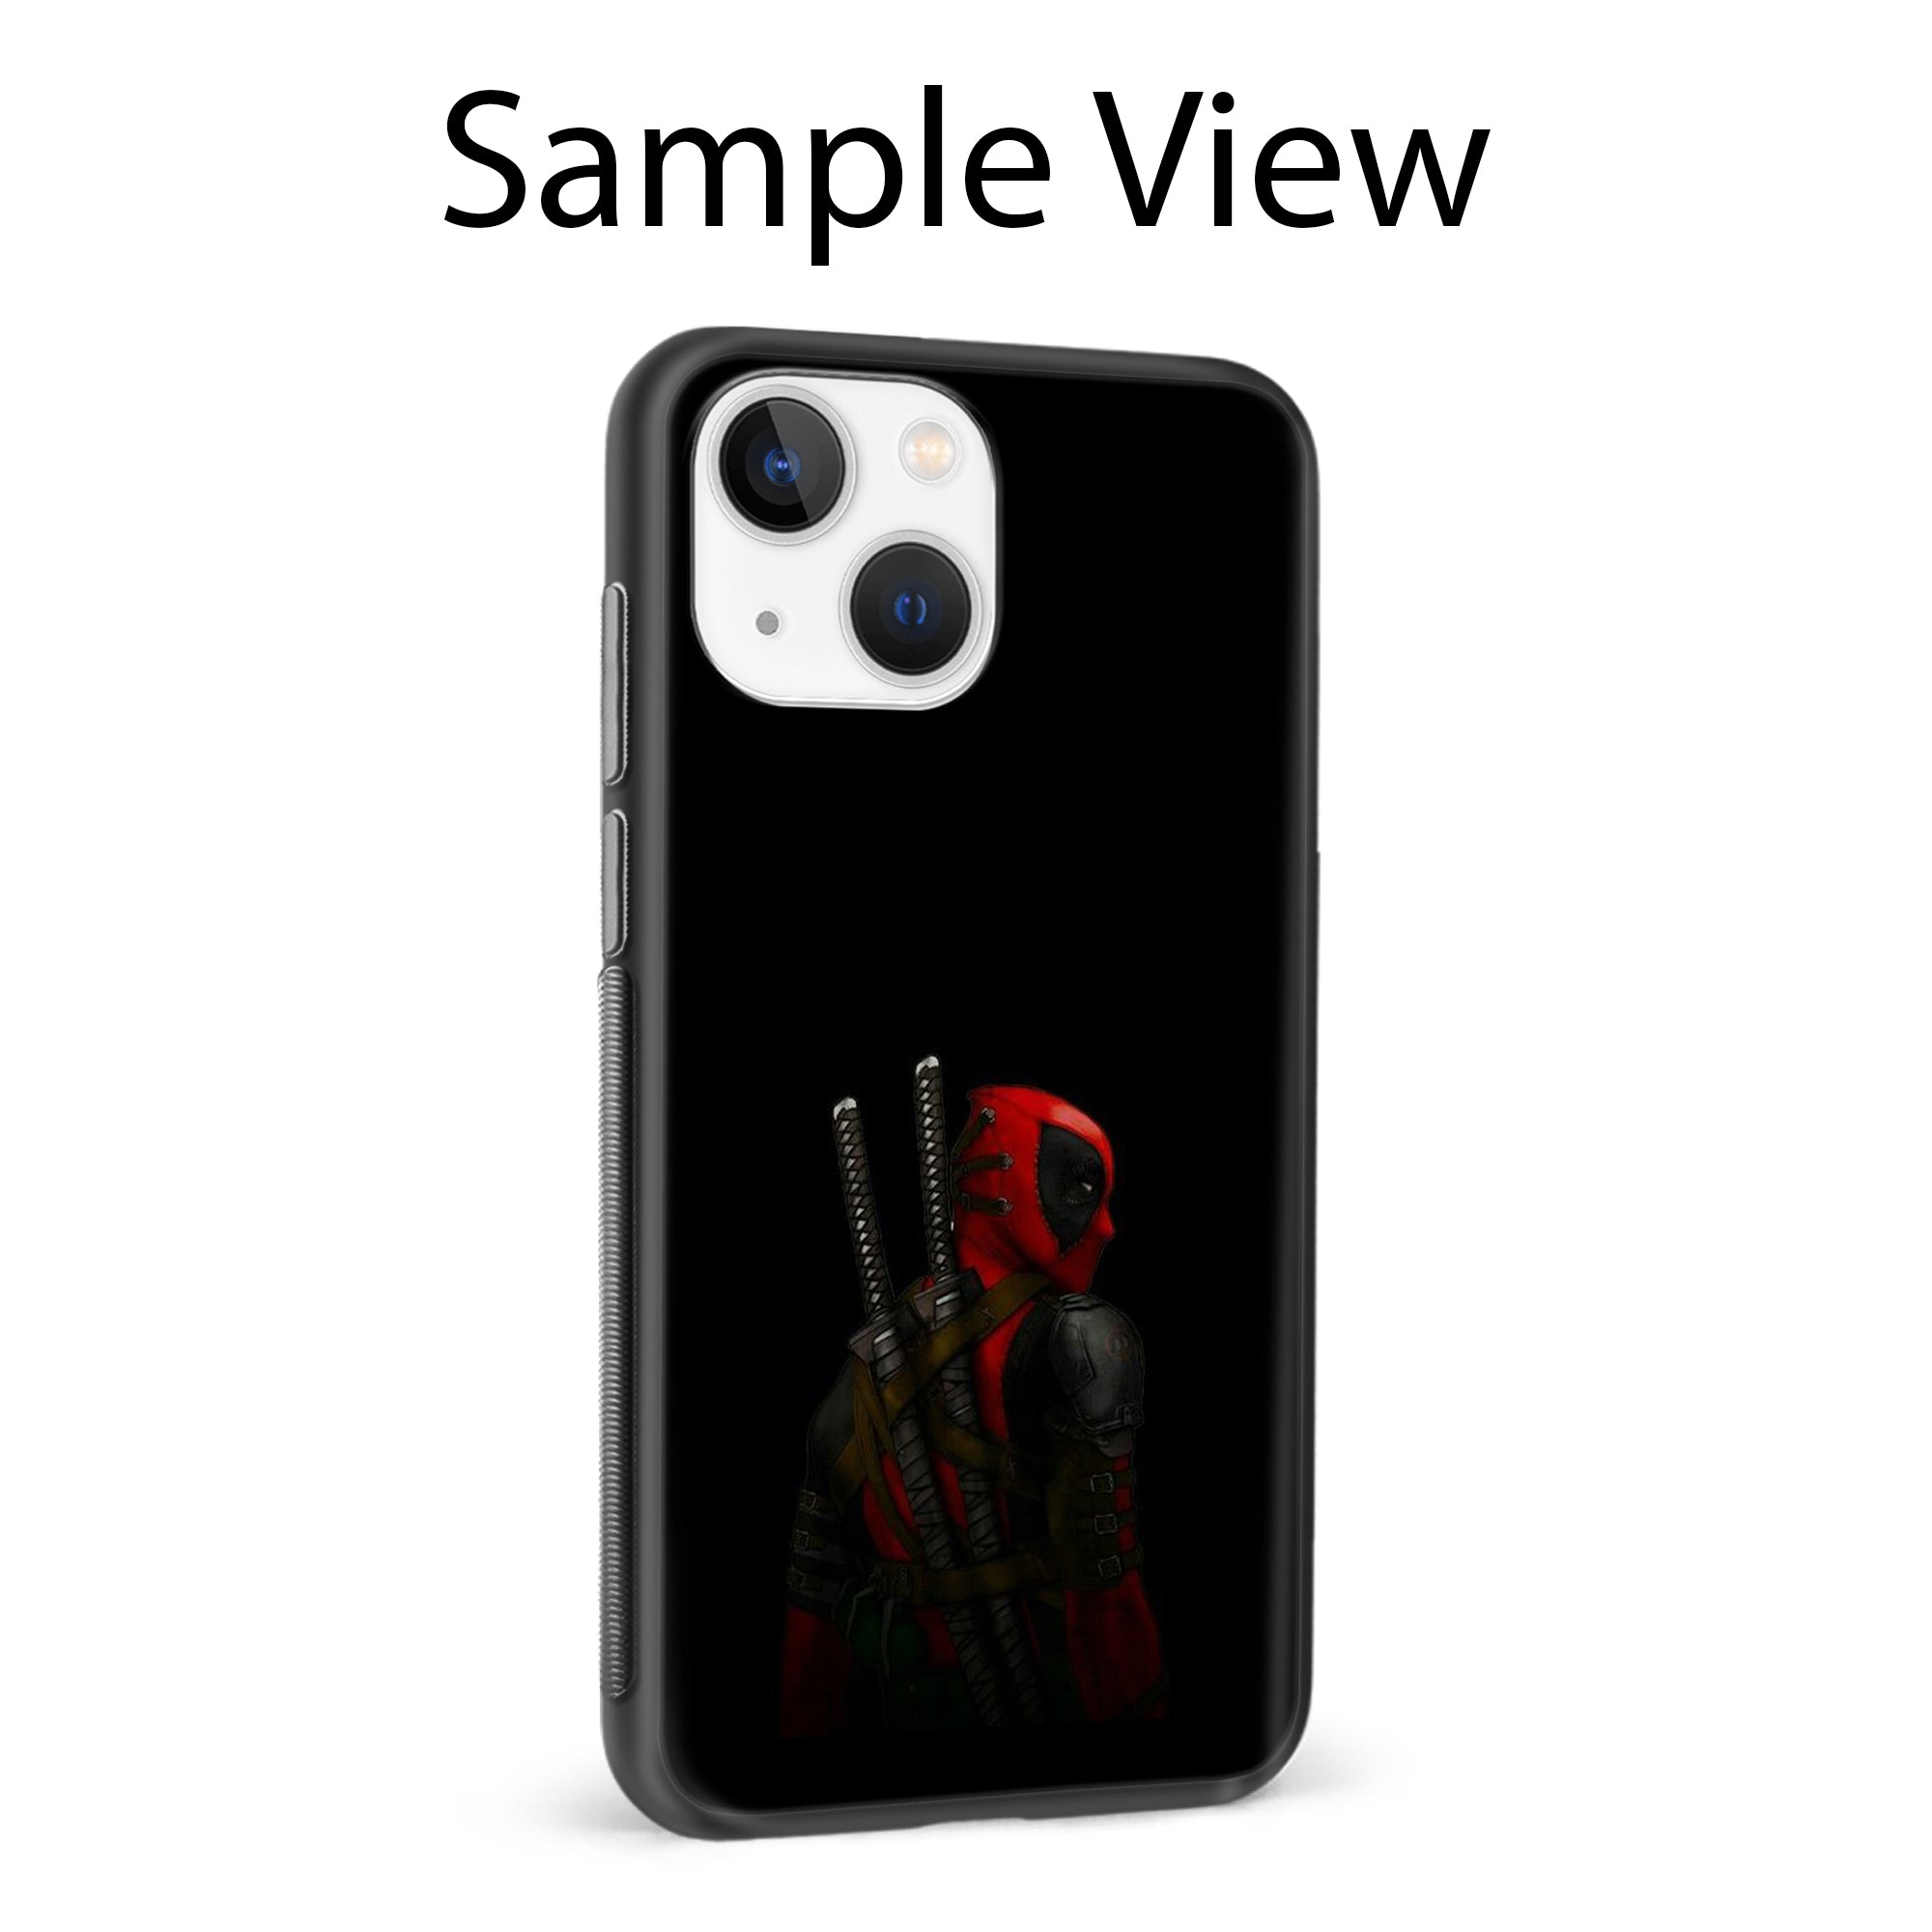 Buy Deadpool Metal-Silicon Back Mobile Phone Case/Cover For Samsung Note 10 Plus (5G) Online